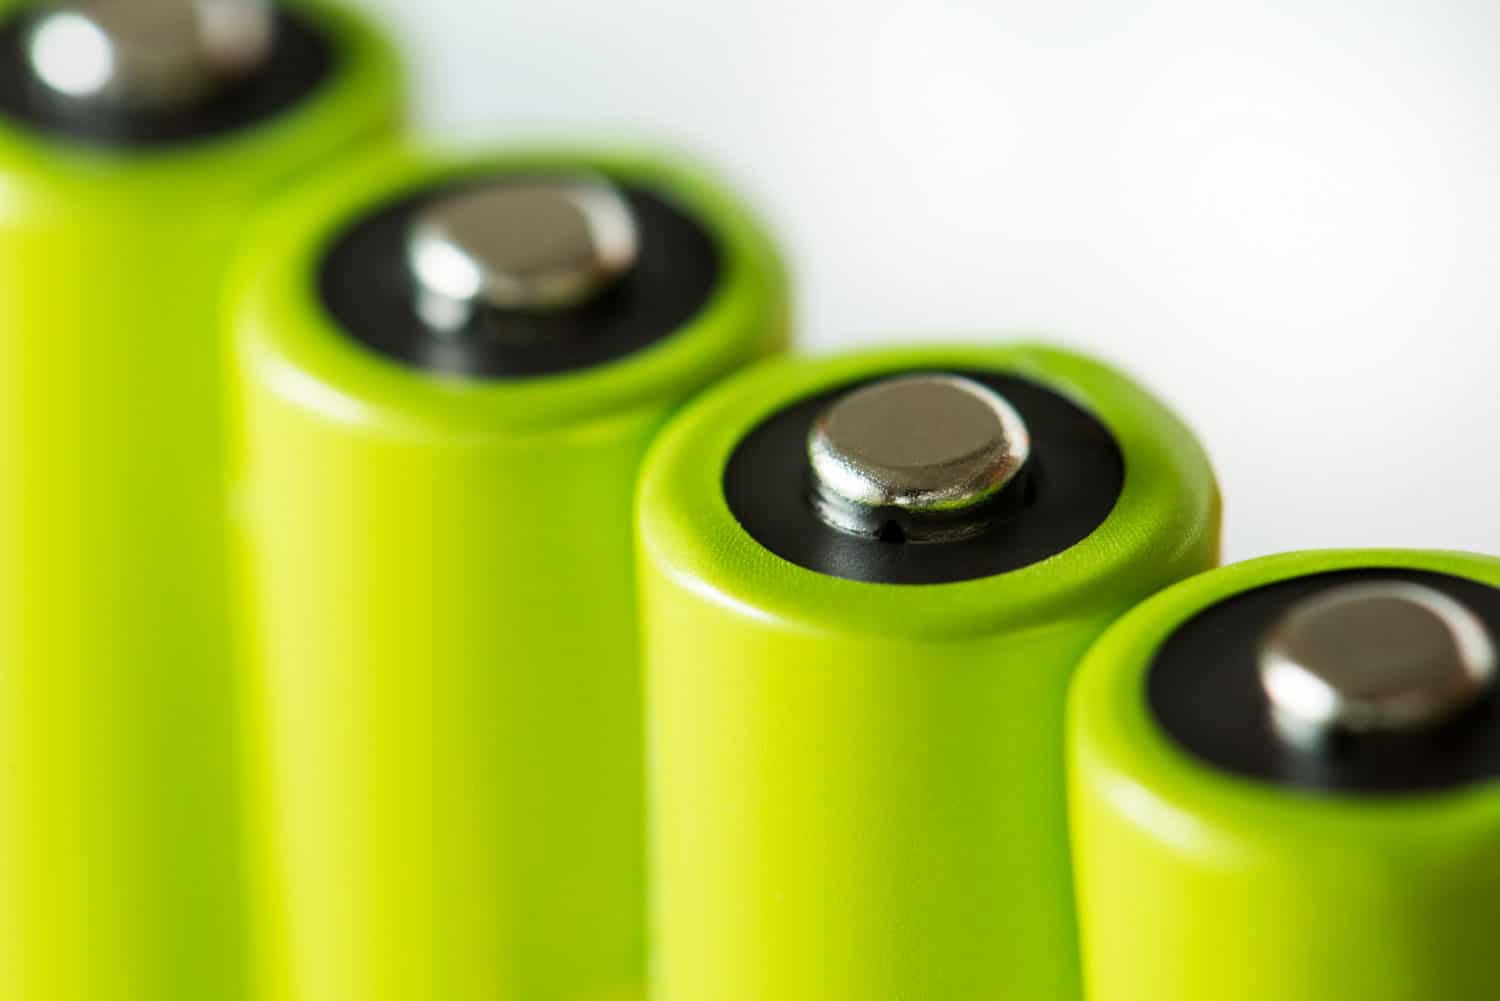 Zinc-air batteries could be better alternative to lithium-ion